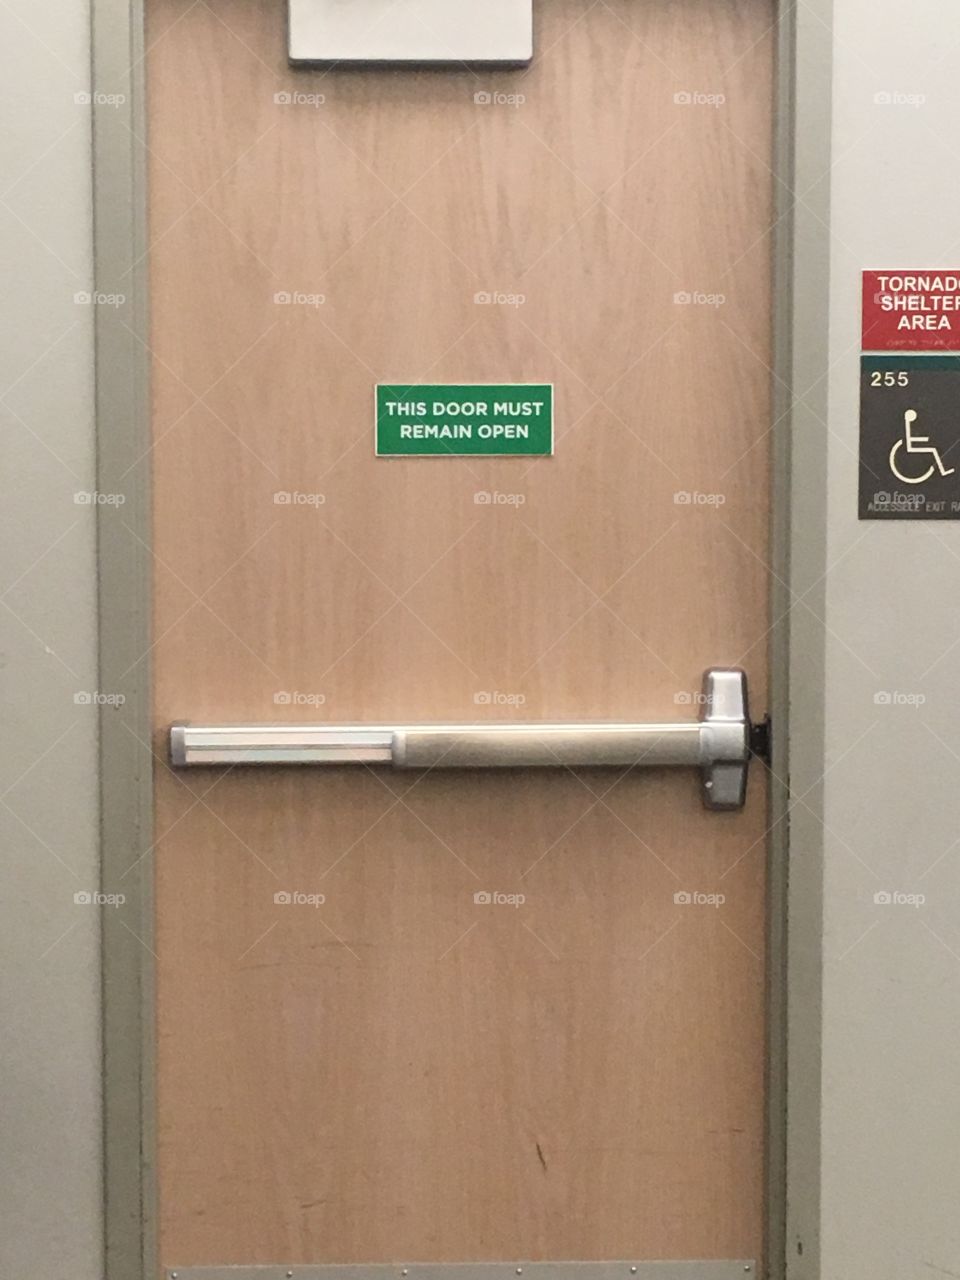 A closed door to a lecture hall at University of North Texas with a sign stating “This door must remain open”